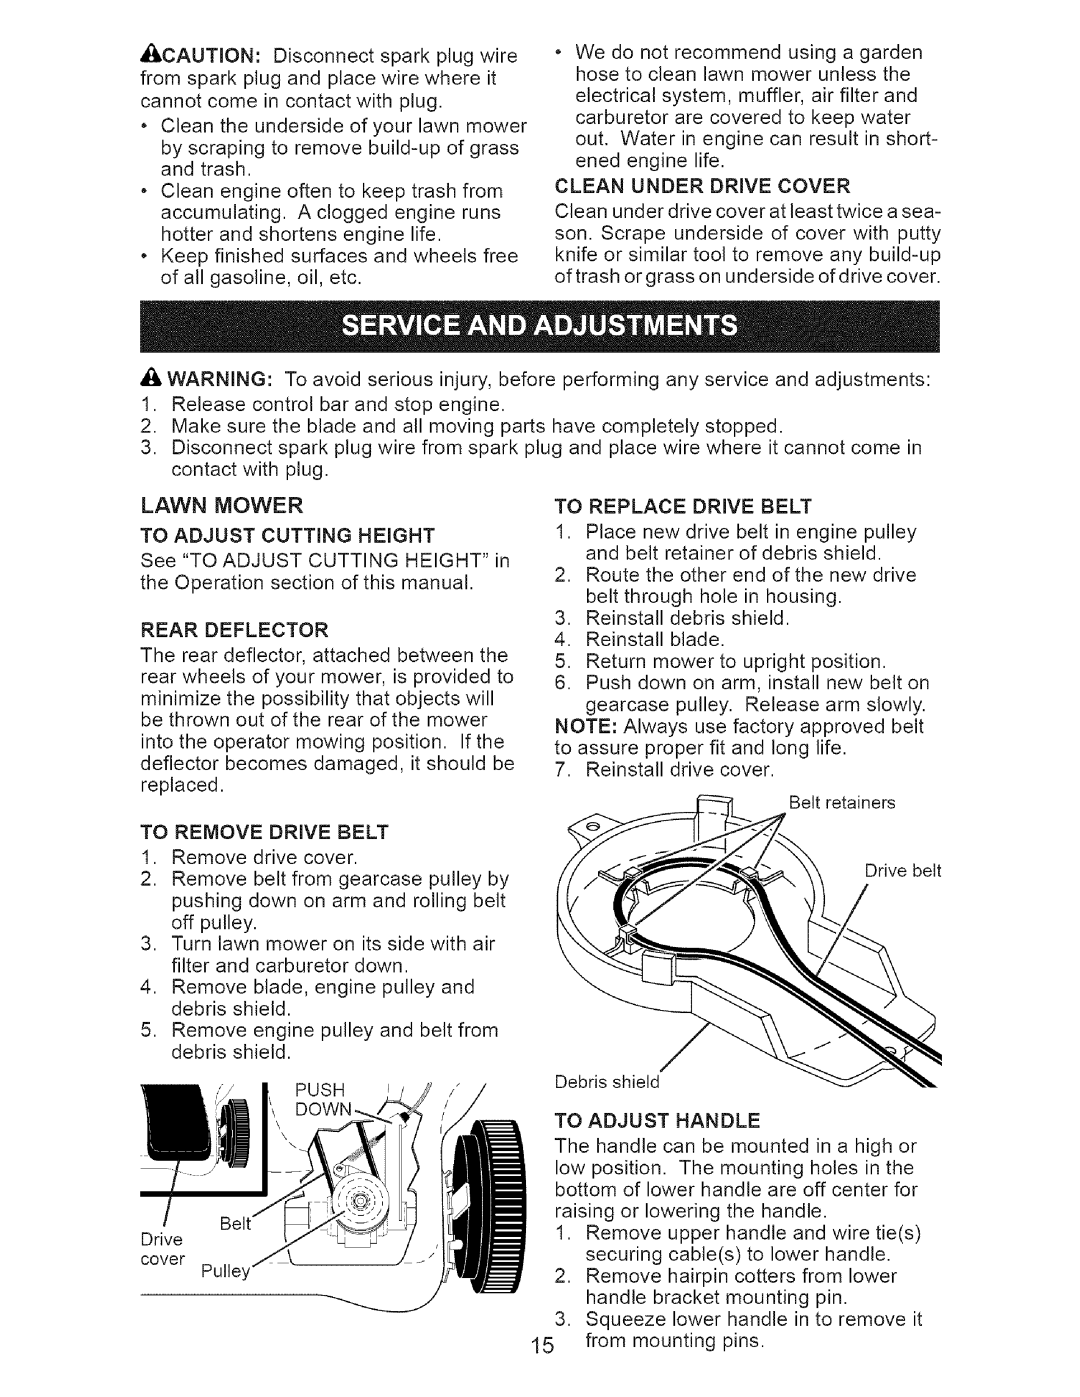 Craftsman 917.376676 owner manual Lawn Mower To Adjust Cutting Height 